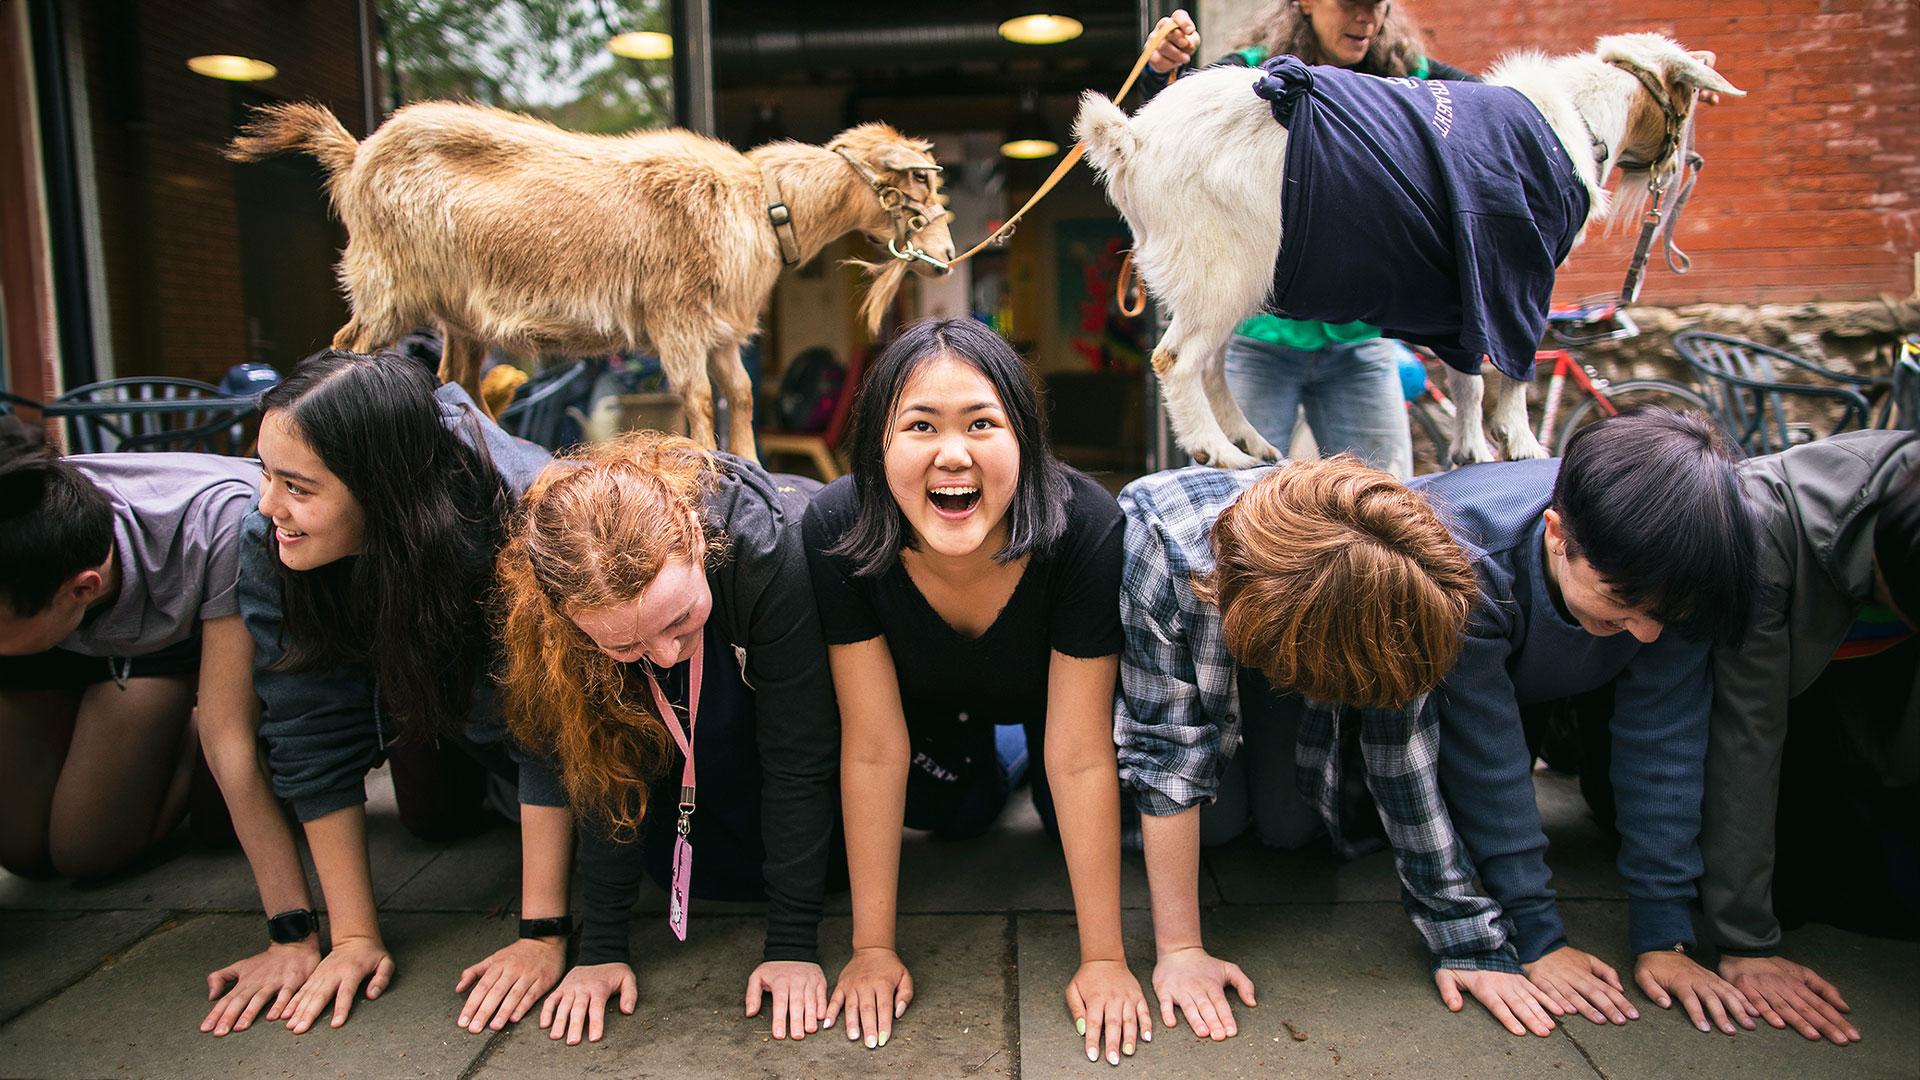 Students posing with goats